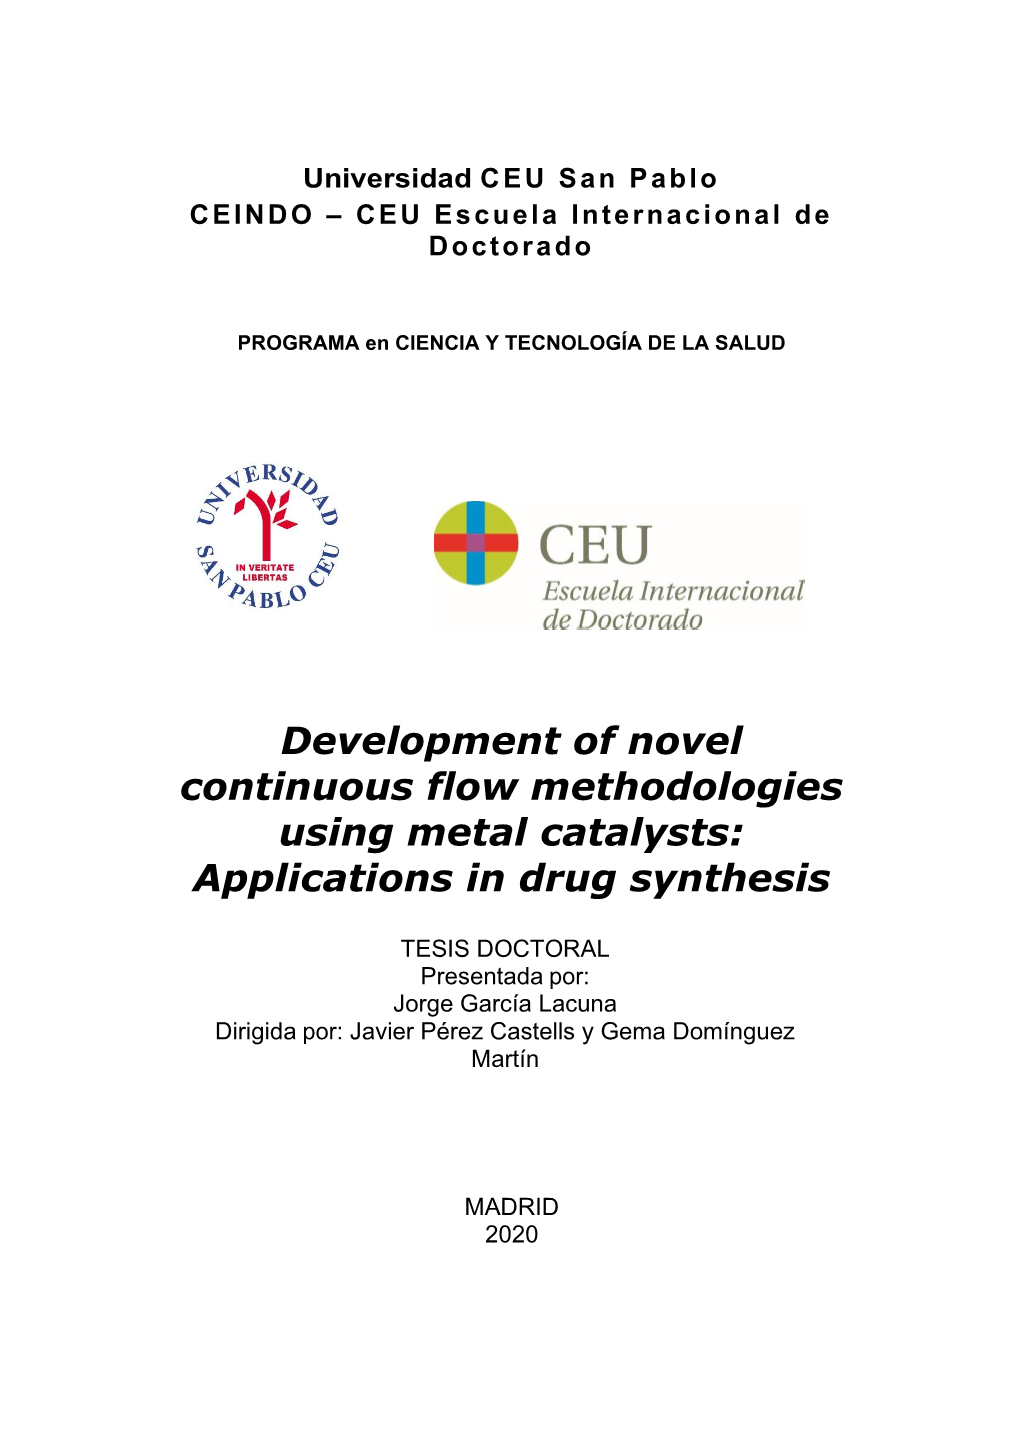 Development of Novel Continuous Flow Methodologies Using Metal Catalysts: Applications in Drug Synthesis